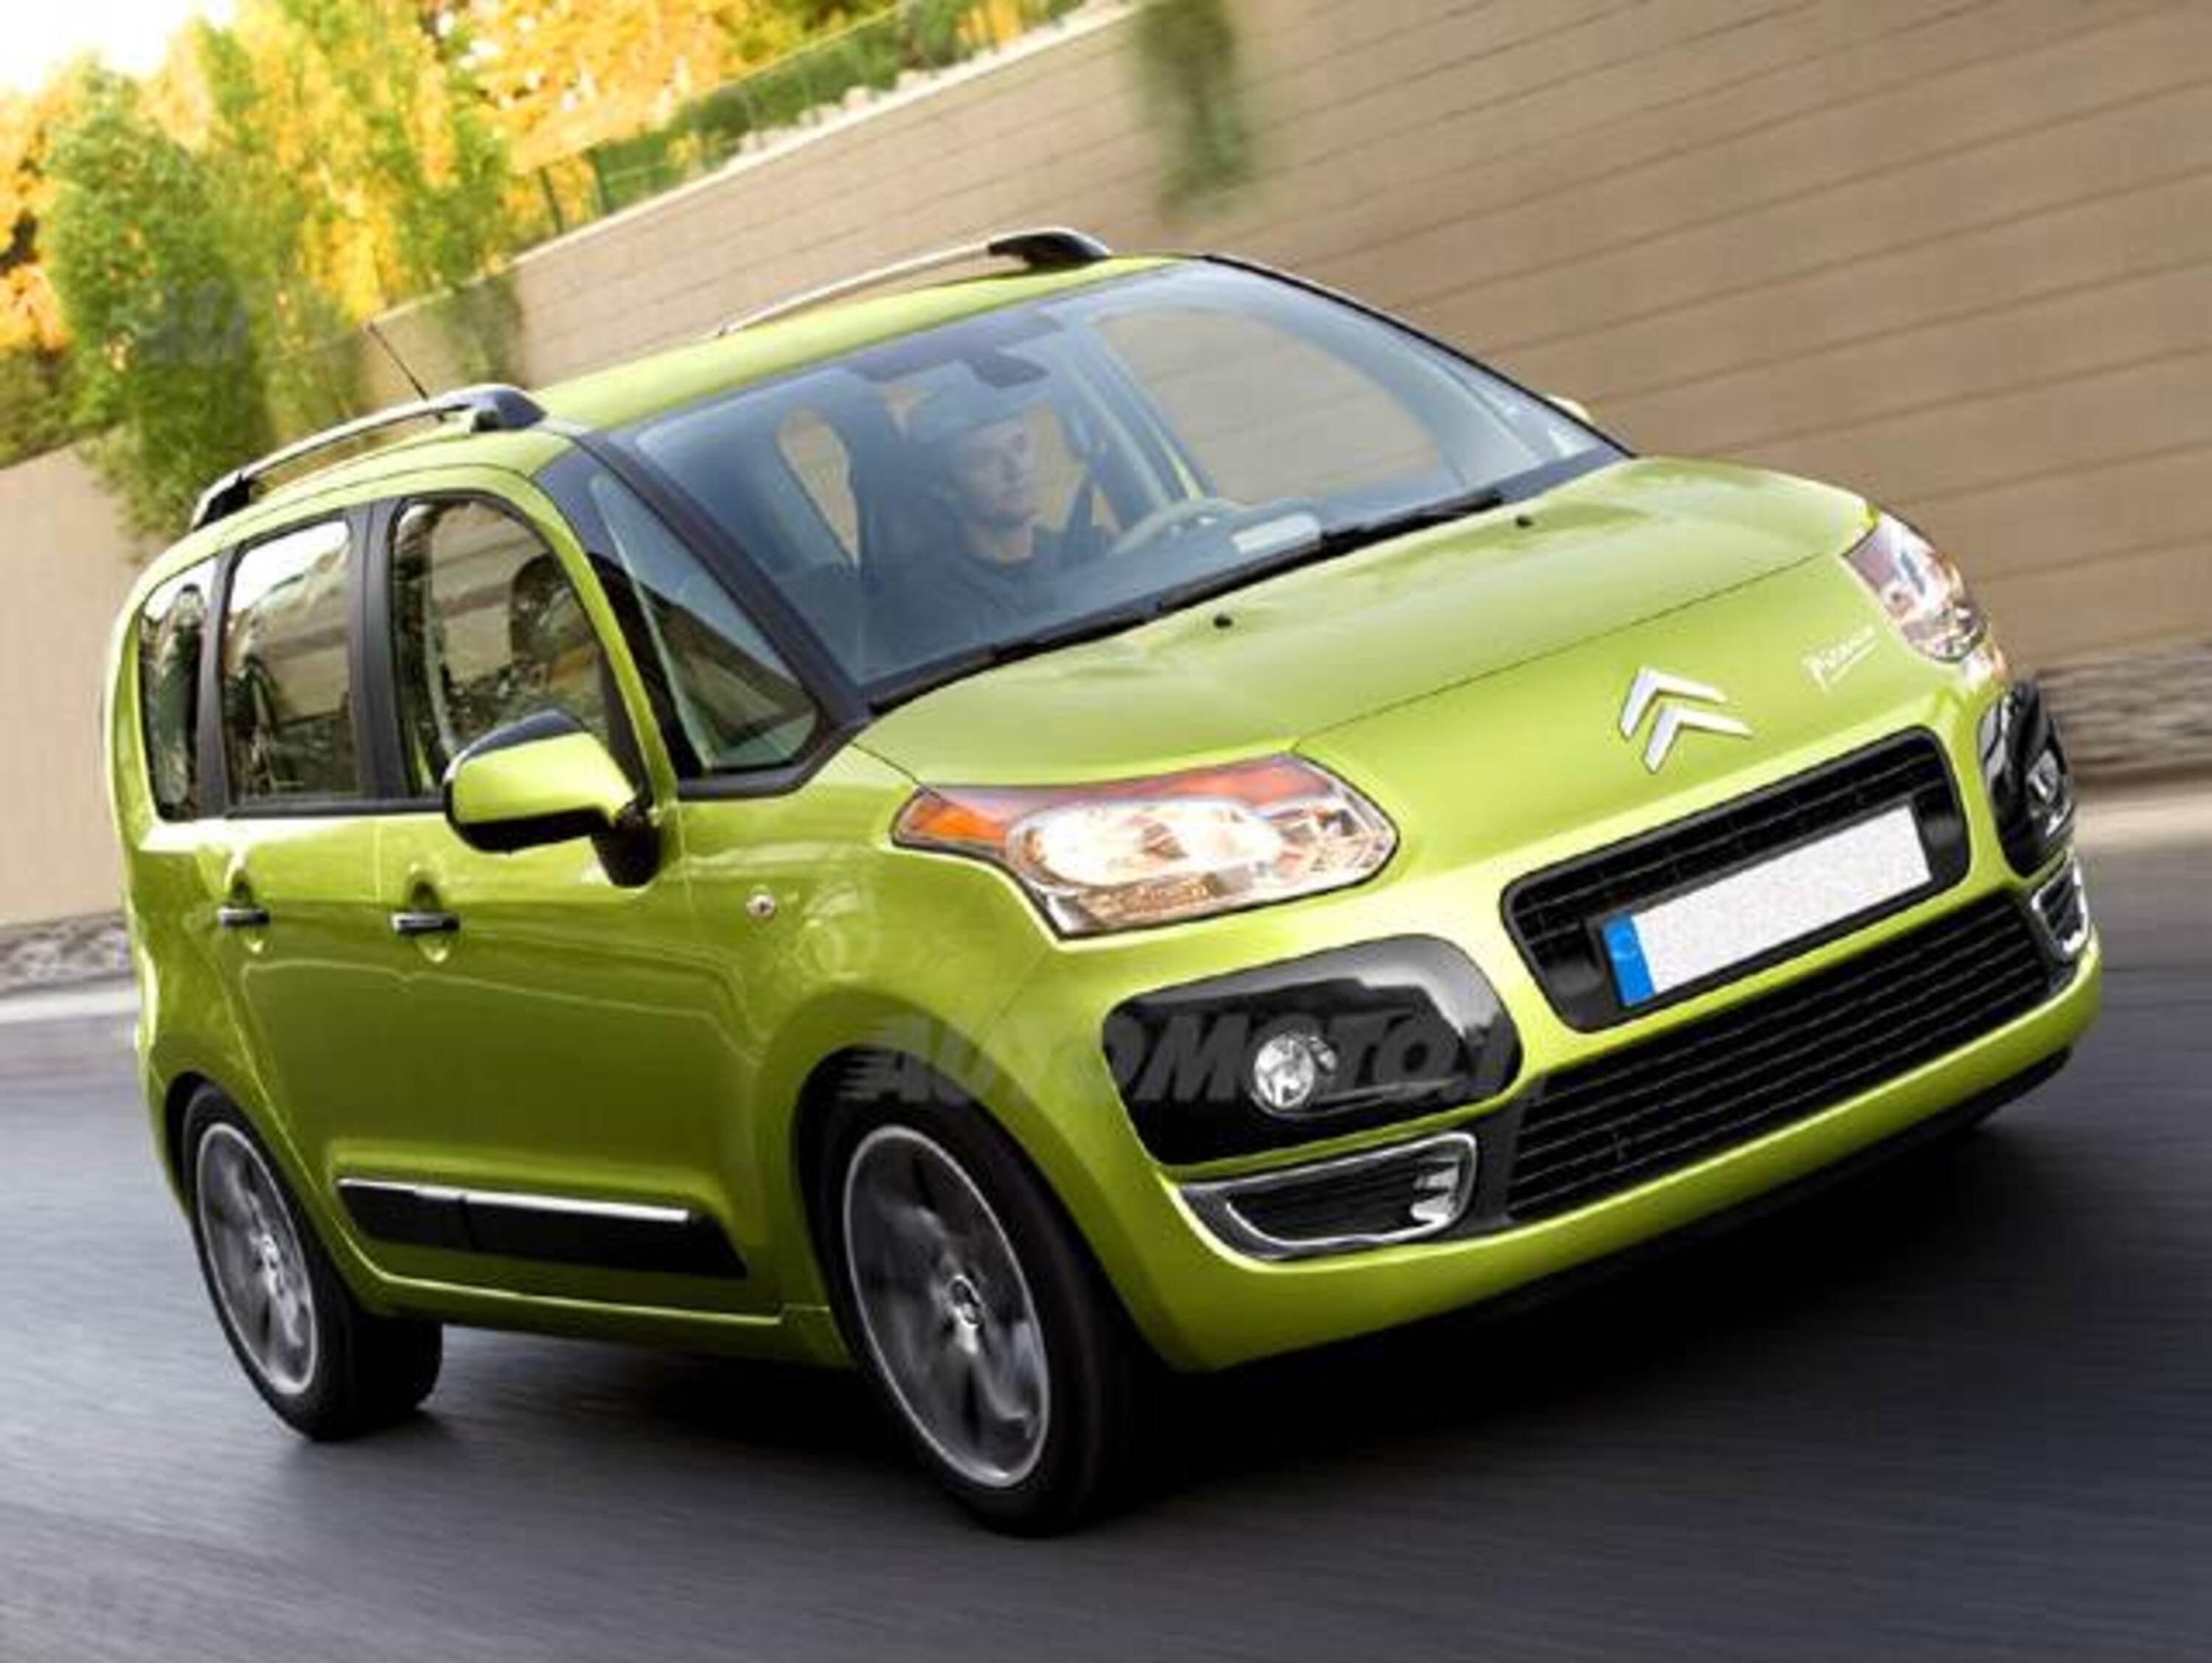 Citroen C3 Picasso 1.6 HDi 90 airdream Style